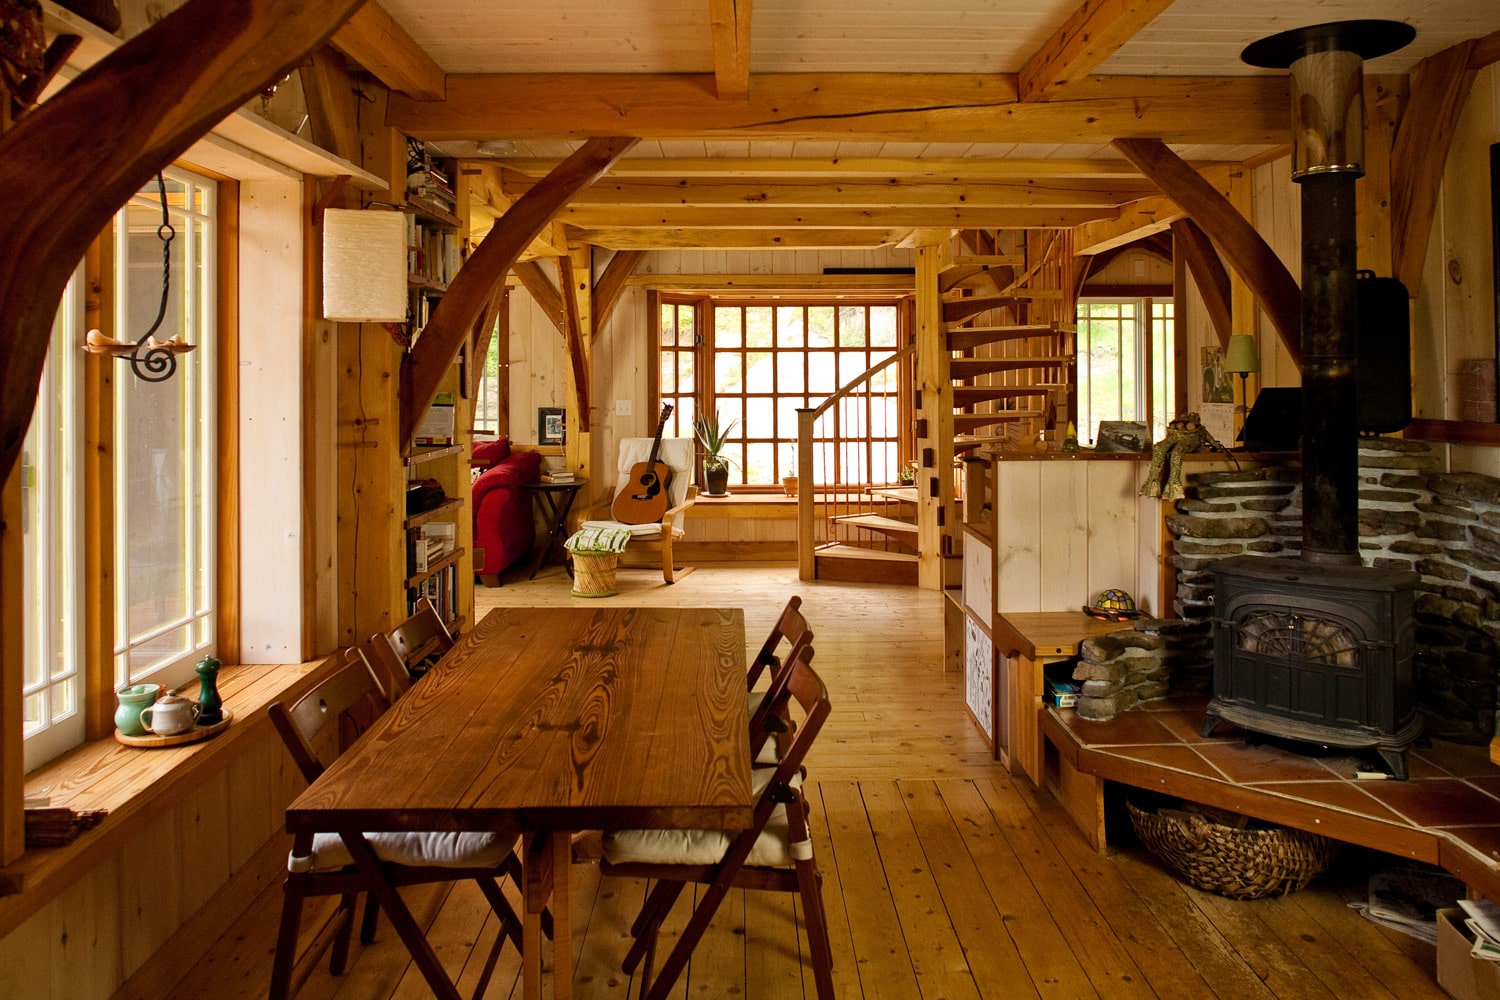 The Humble Abode: A Small Vermont Timber Frame Home